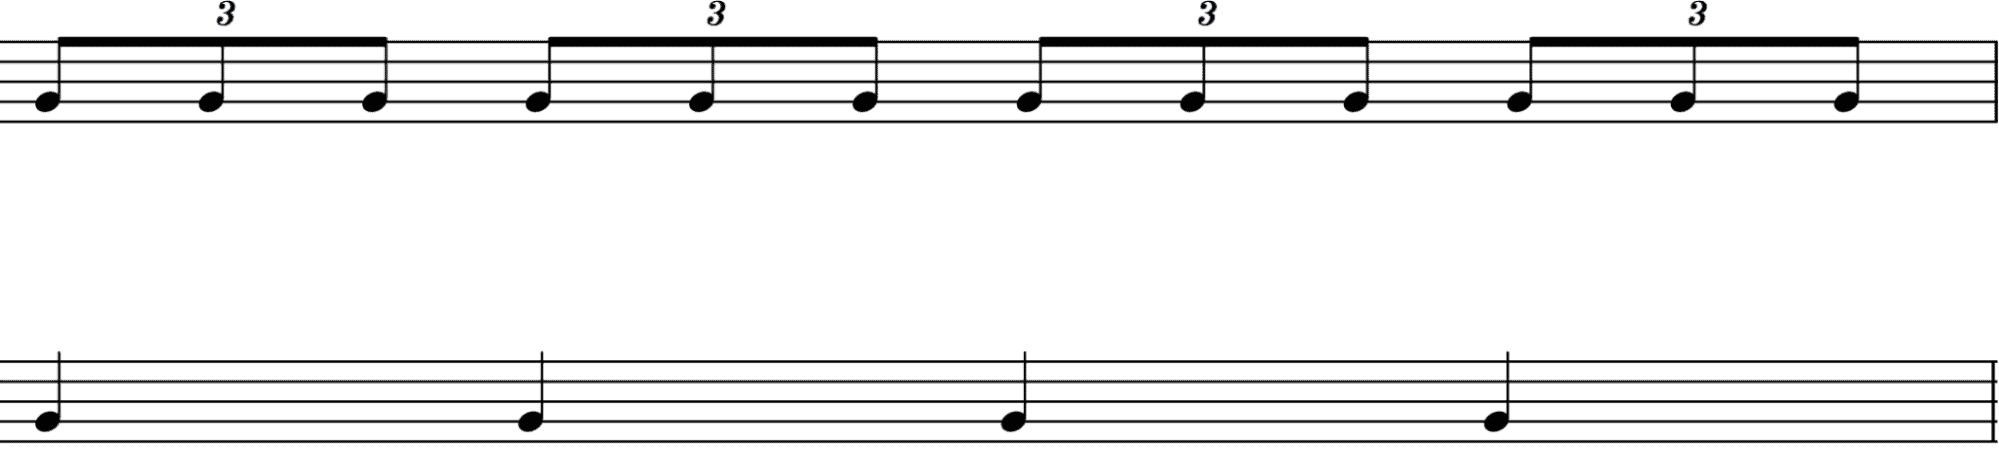 Dotted sixteenth notes